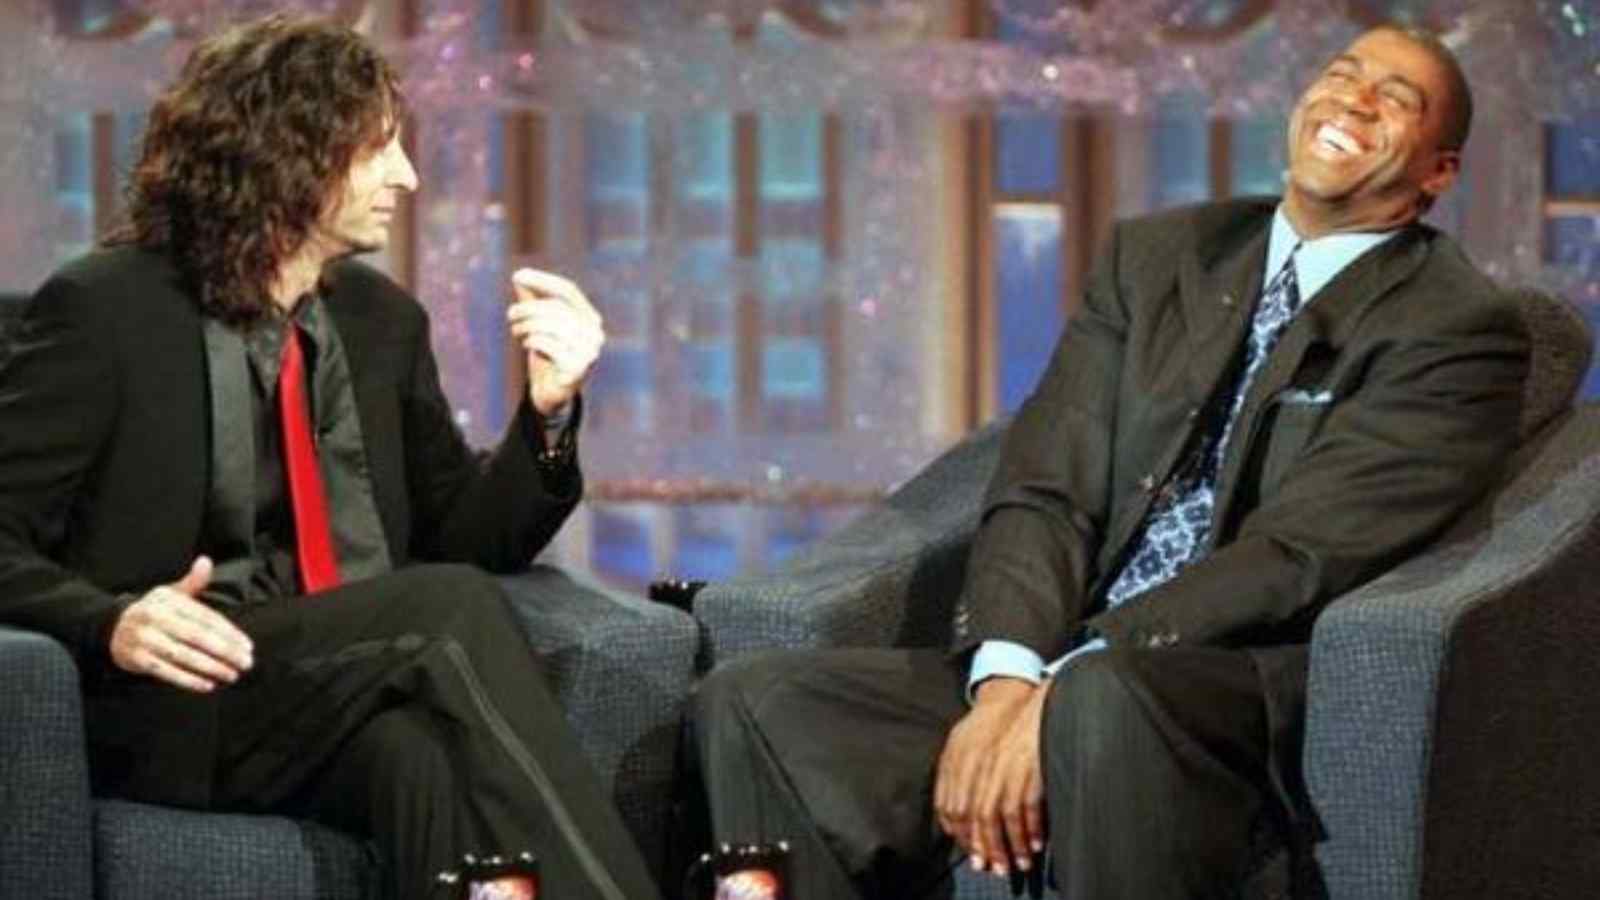 Stern and Johnson on the talk show